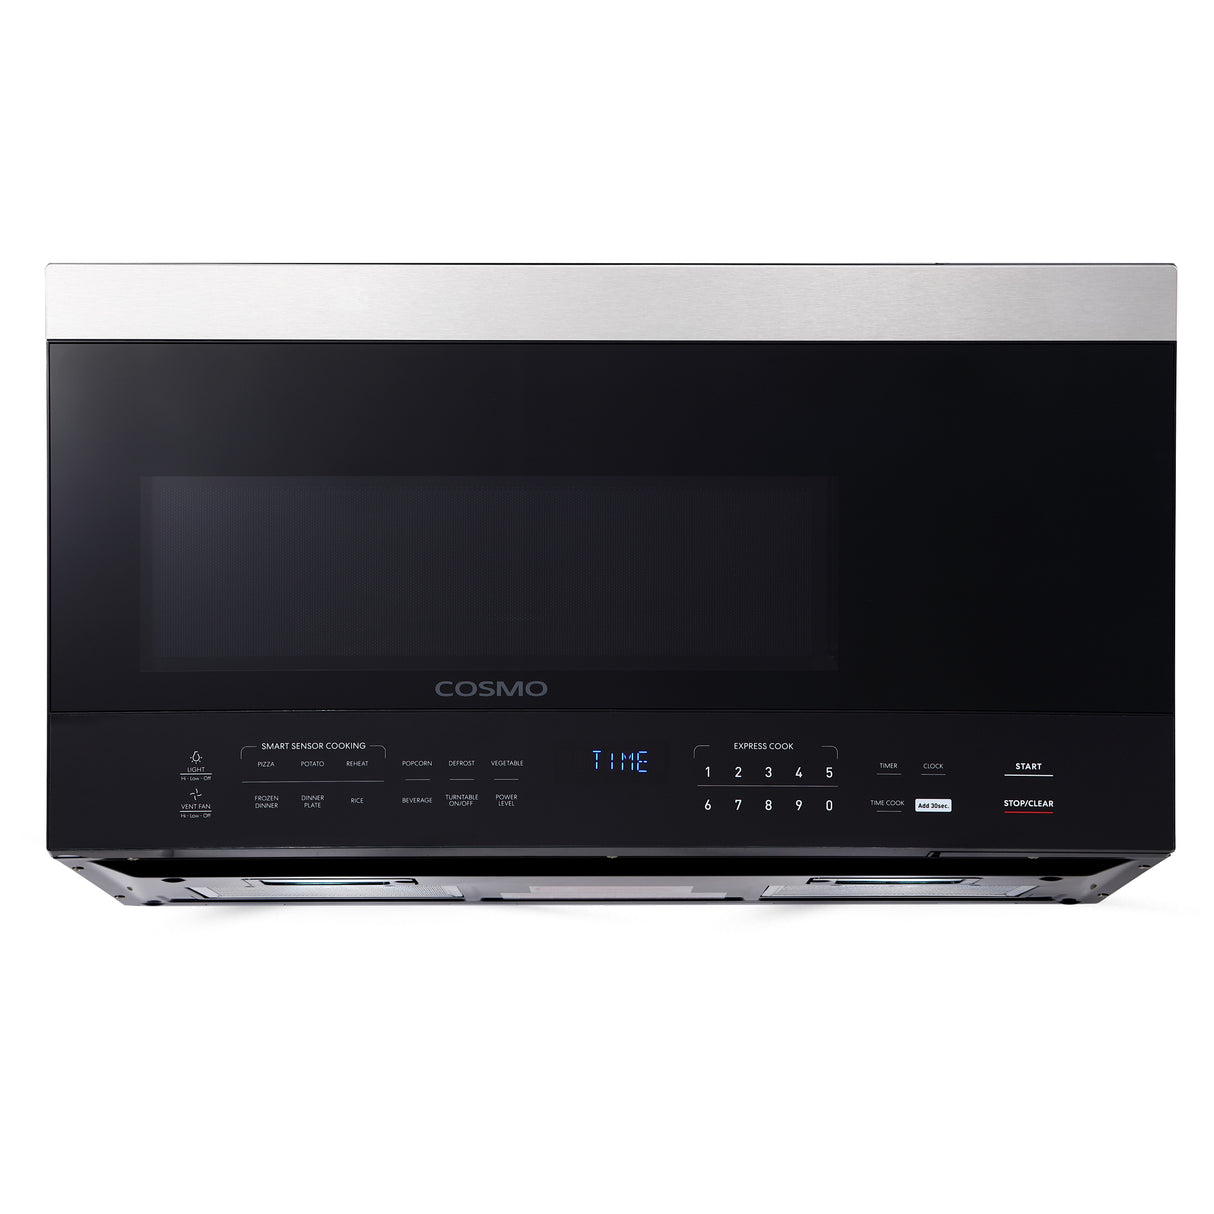 Cosmo 30" 1.34 cu. ft. Over the Range Microwave